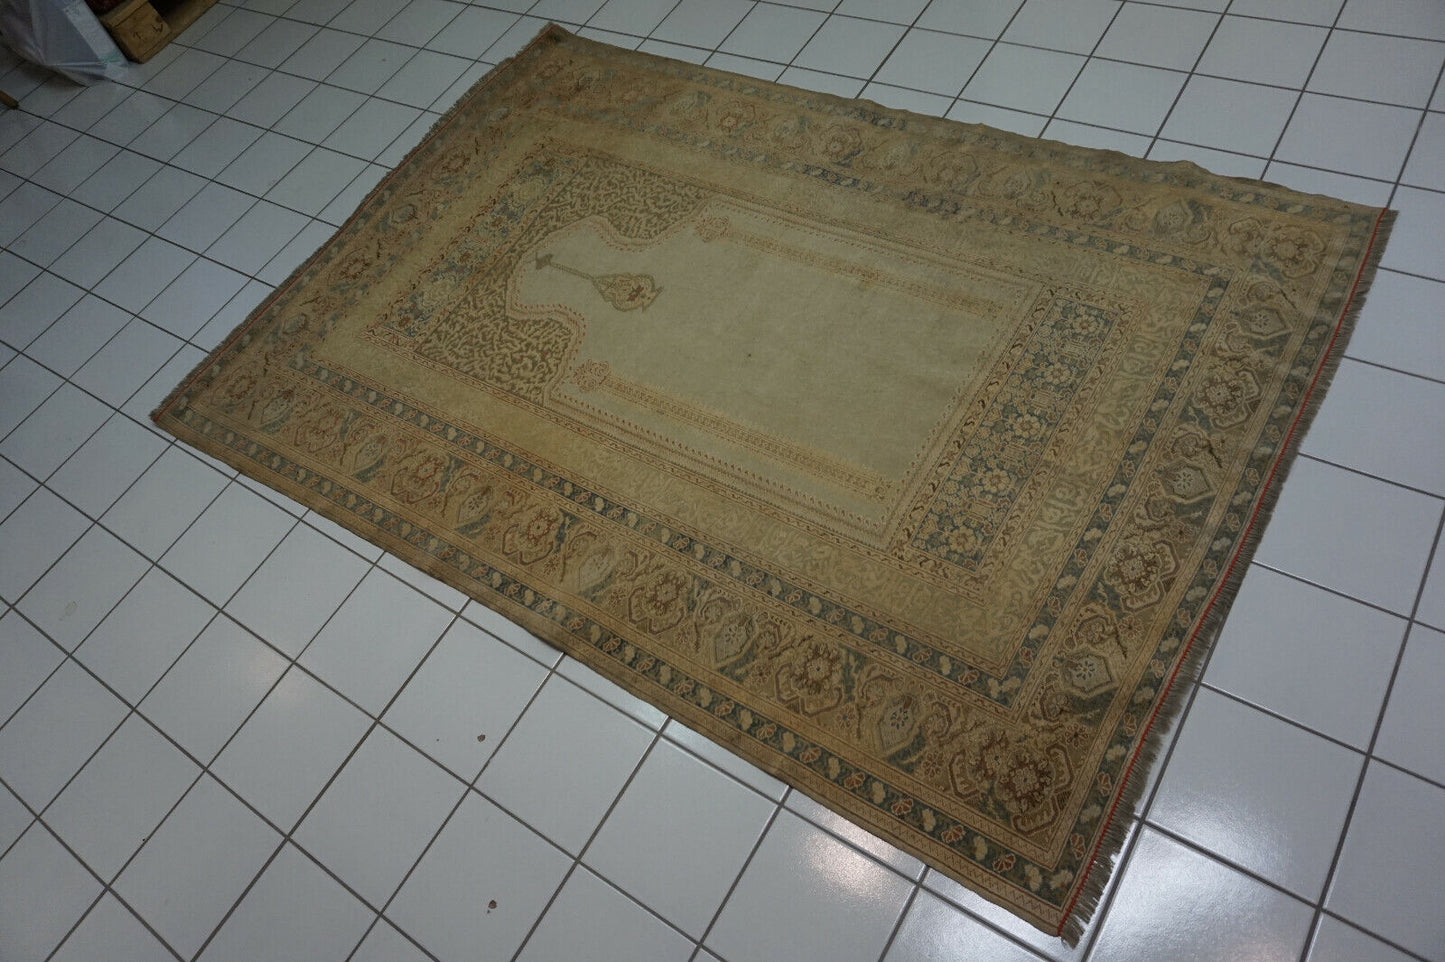 Detailed view of the low pile texture and vintage charm of the rug